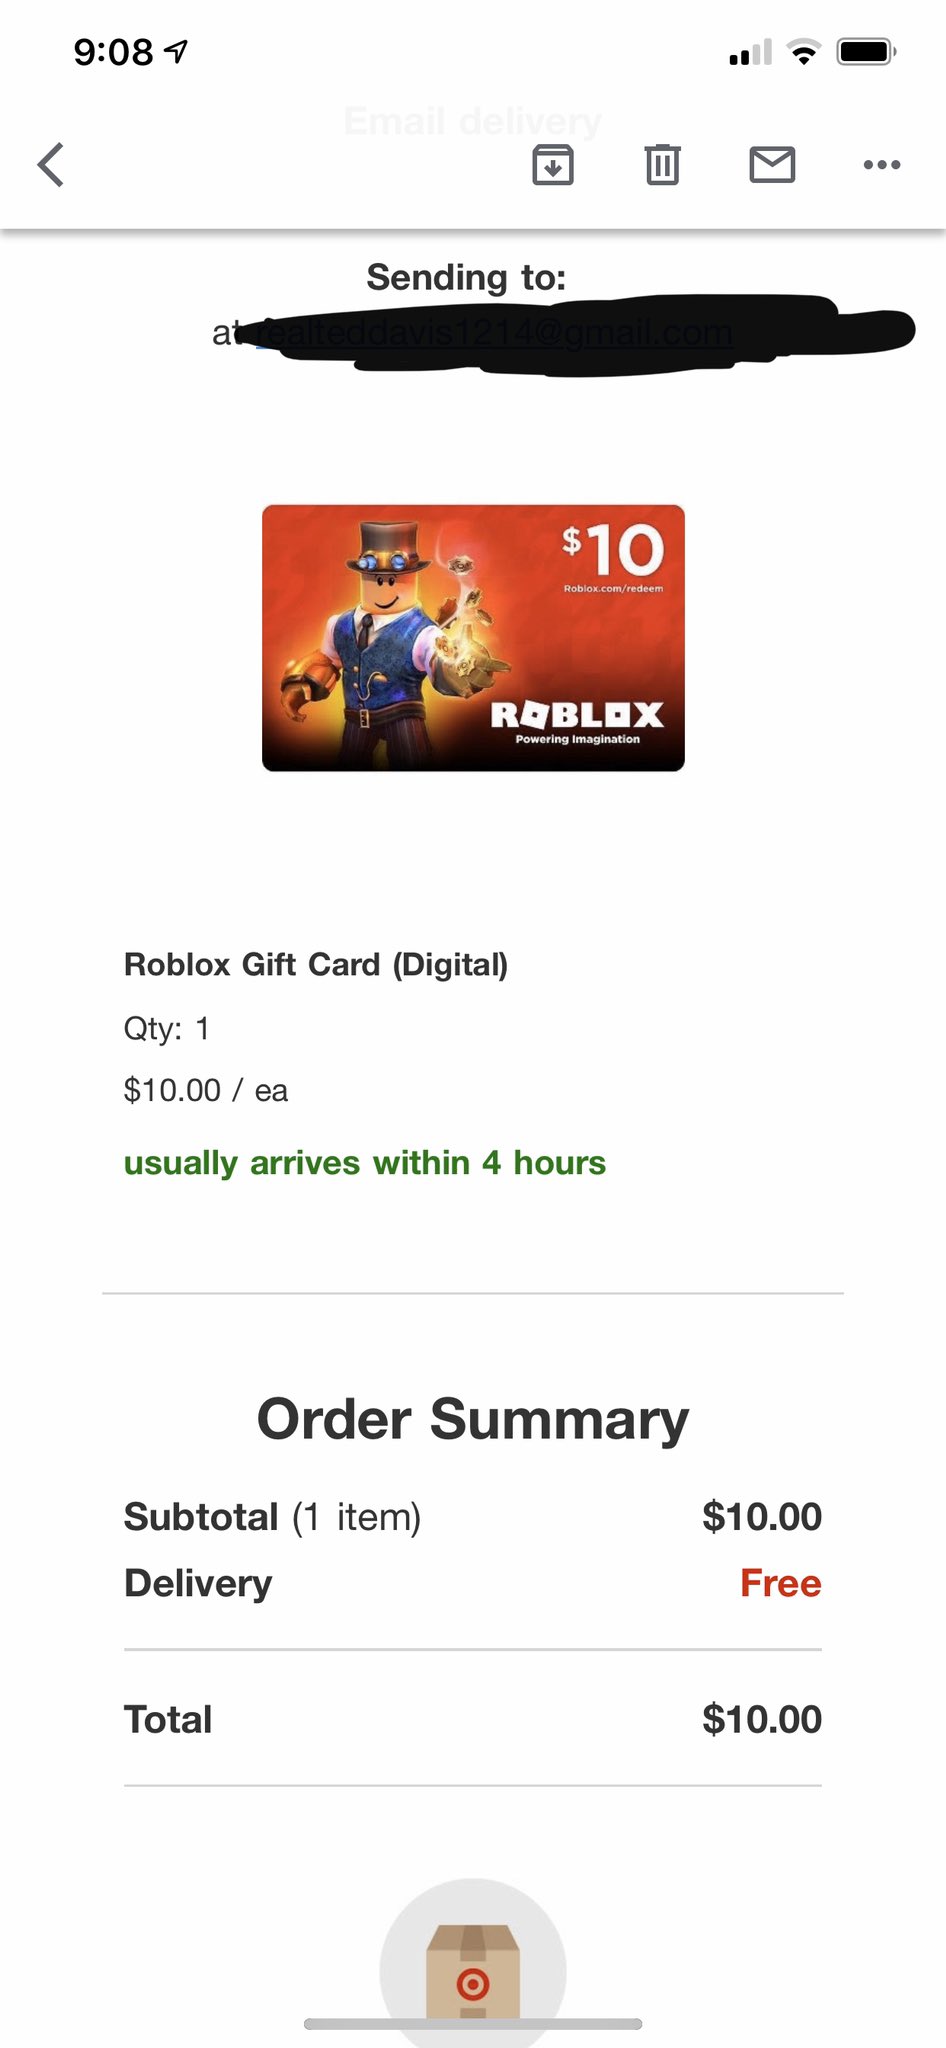 Ted On Twitter Doing A 10 Roblox Gift Card Giveaway I Ll Giveaway A Free 10 Roblox Gift Card To One Person How To Enter 1 Retweet This Post 2 Follow Me - what timezone is roblox in